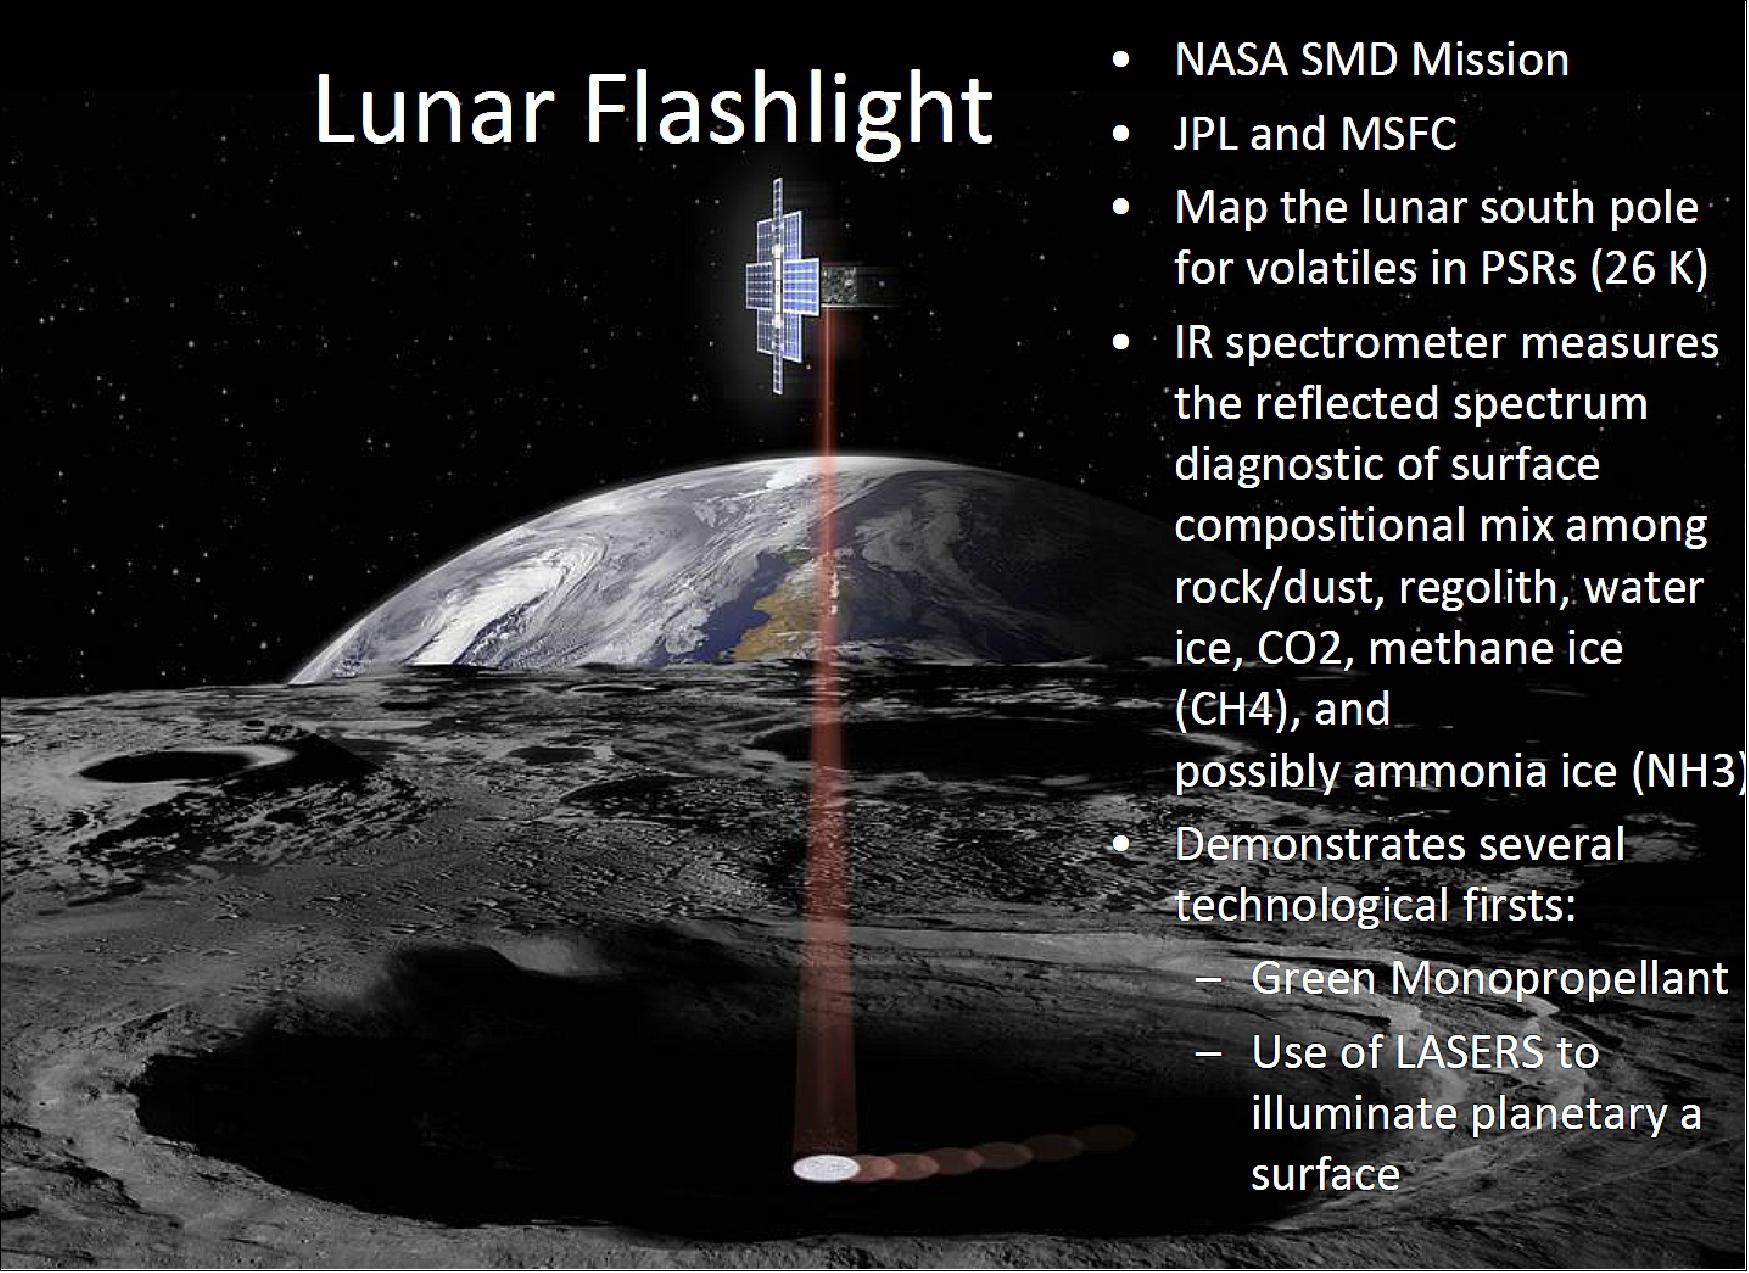 Figure 1: The artiist's concept image shows the Lunar Flashlight 6U CubeSat in a position over the south pole of the moon, designed to search for ice. The spacecraft will use its near-infrared lasers to shine light into shaded polar regions on the moon, while an onboard reflectometer will measure surface reflection and composition (image credit: NASA) 4)